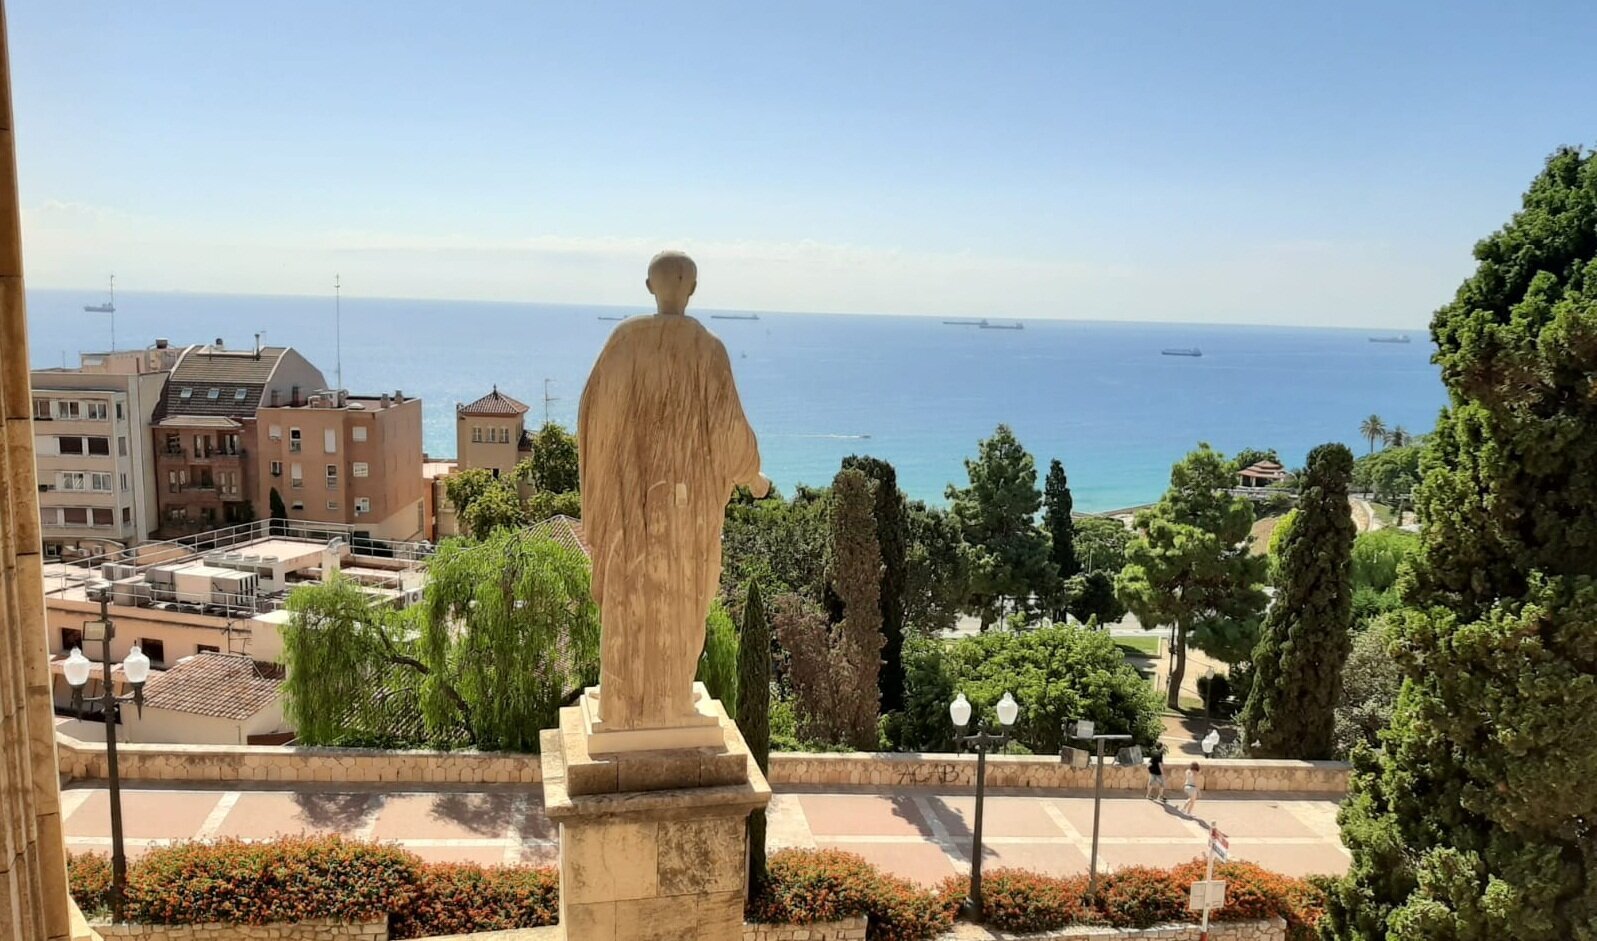 Tarragona sights and beaches: what to see in the ancient city of Spain